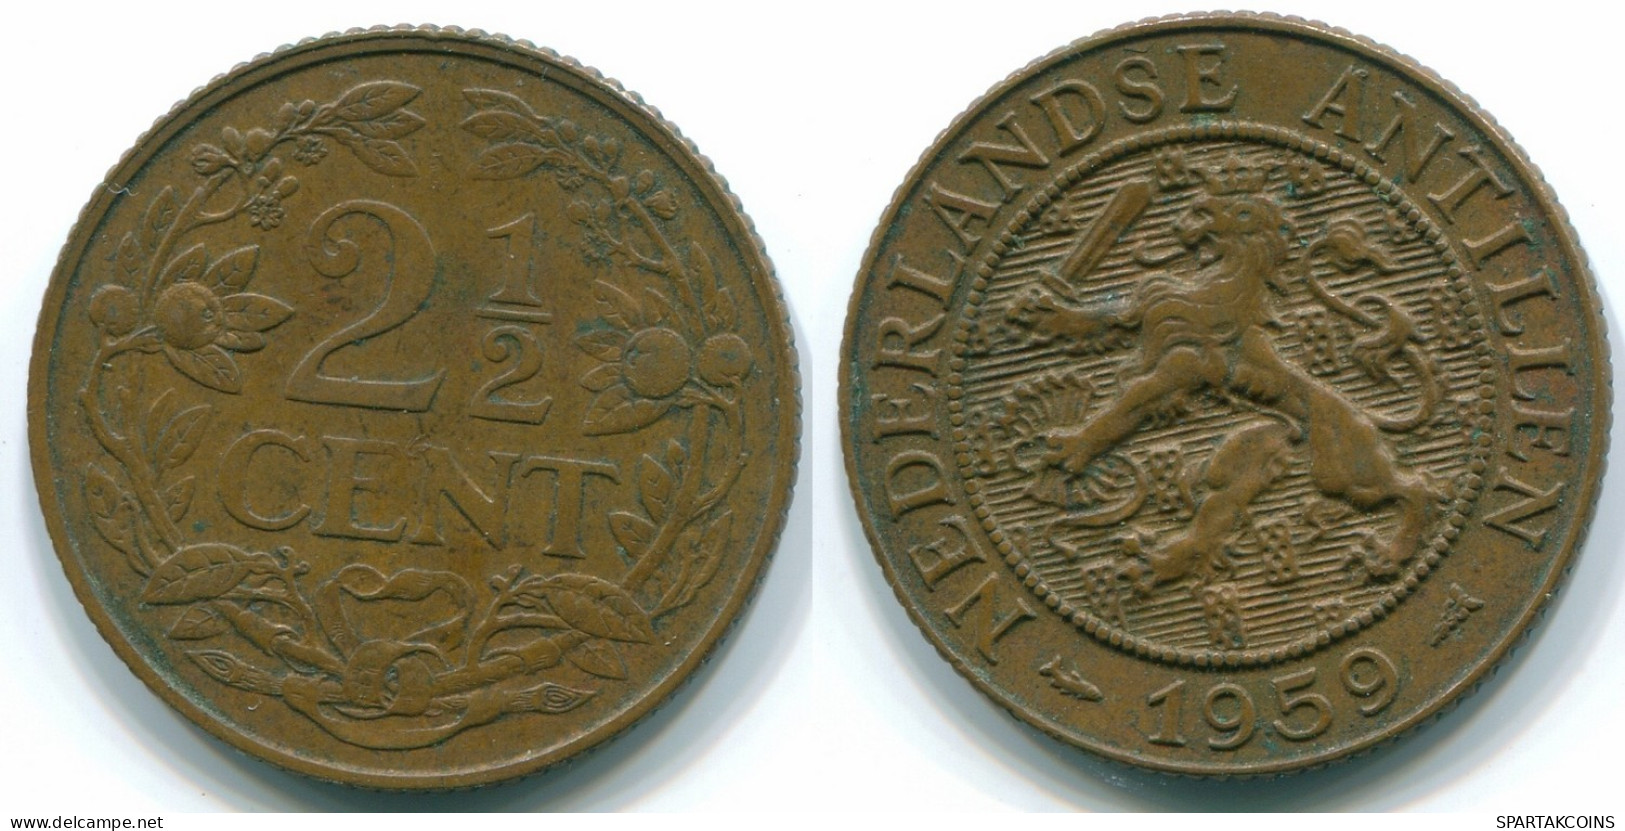 2 1/2 CENT 1959 CURACAO Netherlands Bronze Colonial Coin #S10159.U.A - Curacao